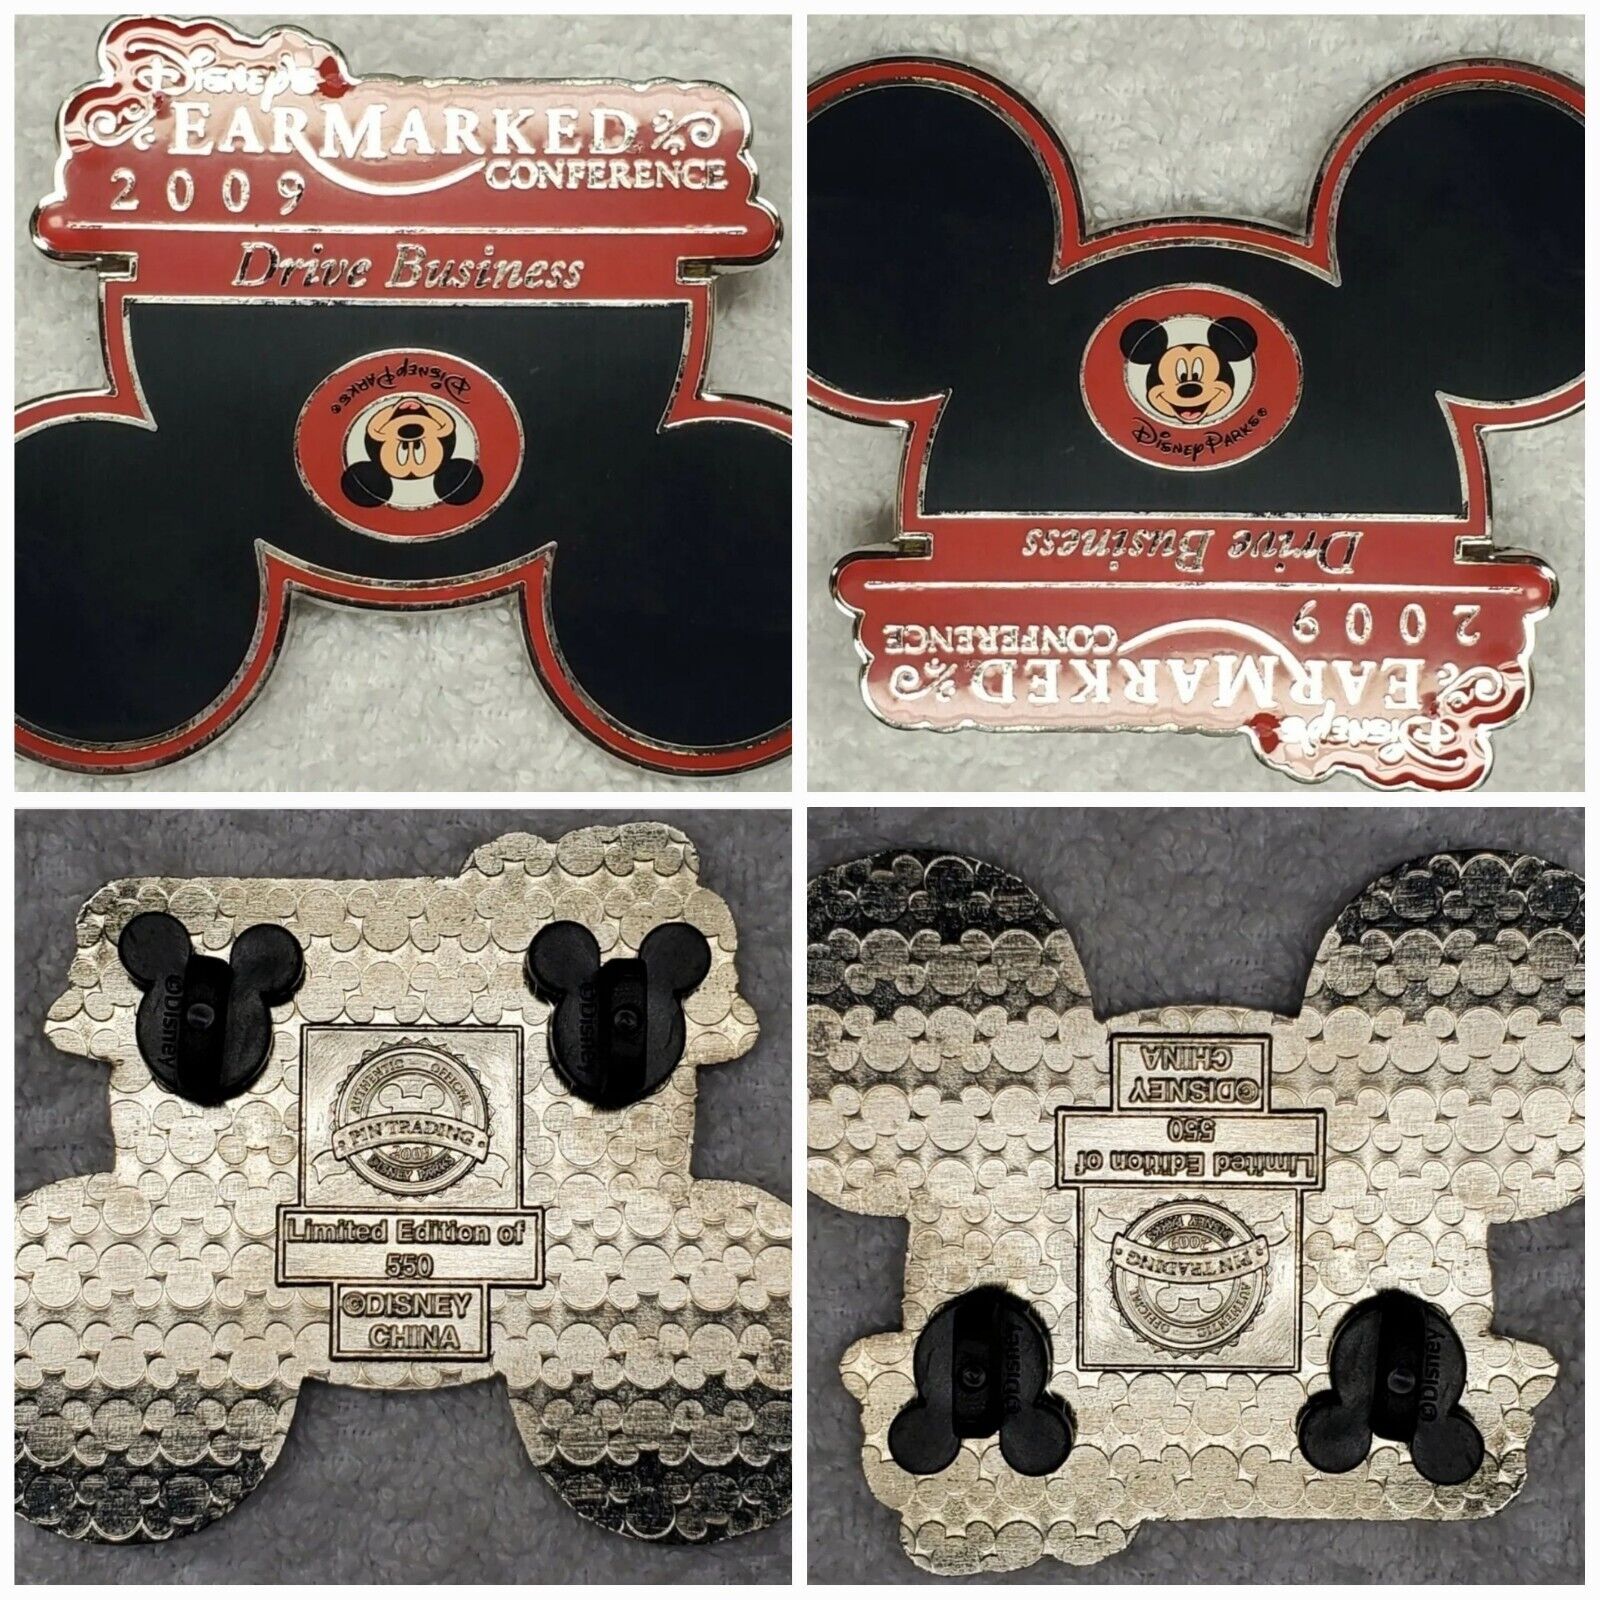 Scarce XL Limited Edition Disney Pin 1 of 550 Earmarked 2009 Mickey Mouse Ears